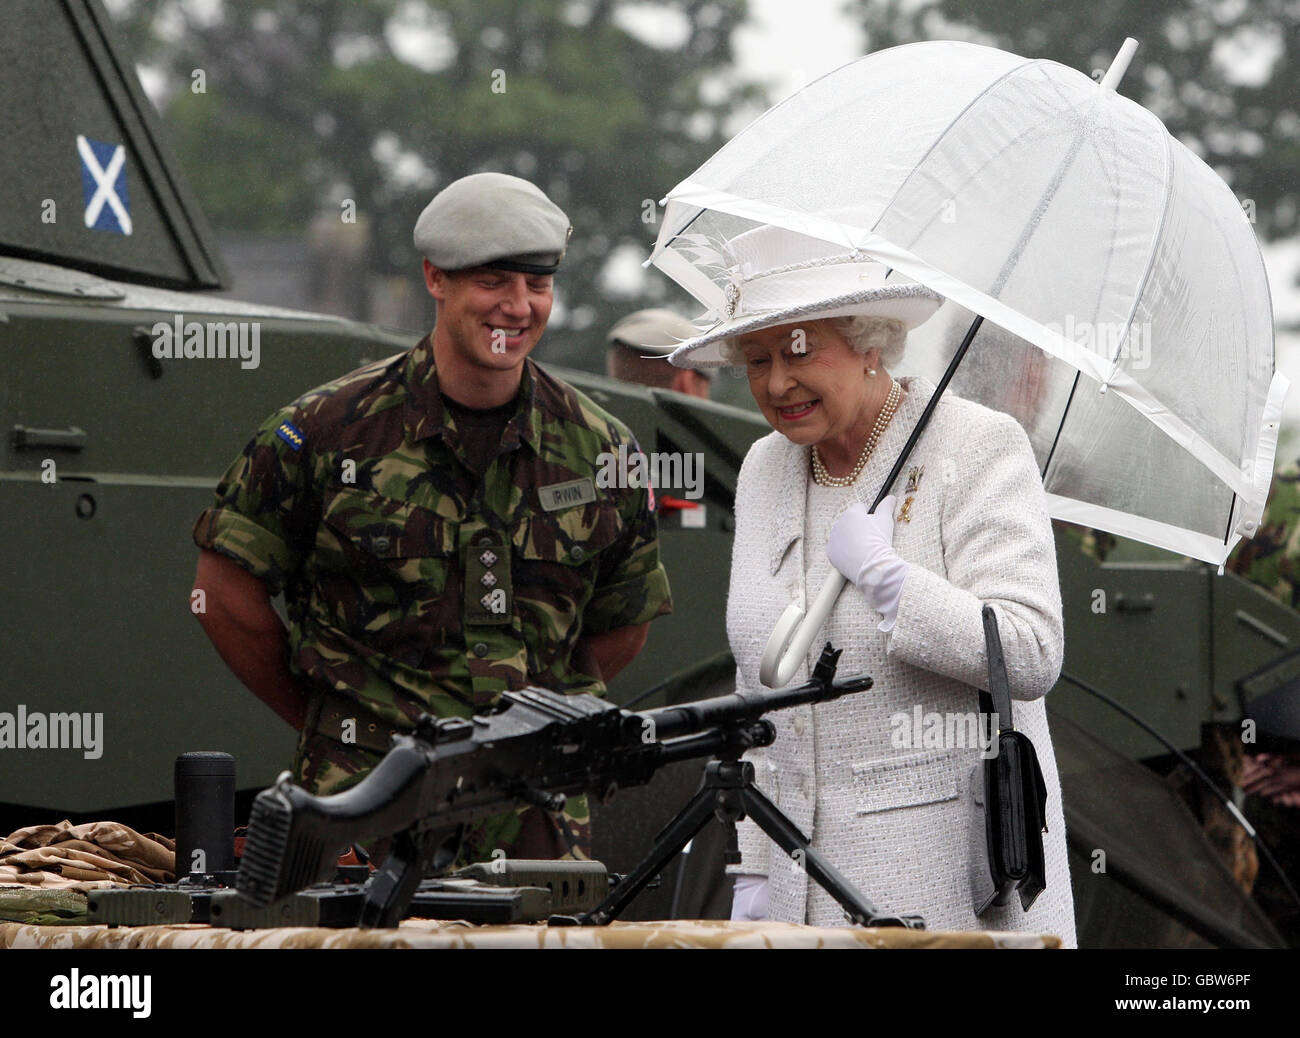 Queen Elizabeth II view weaponry during a visit to The Royal Scots Dragoon Guards at Redford Barracks, Edinburgh. Stock Photo